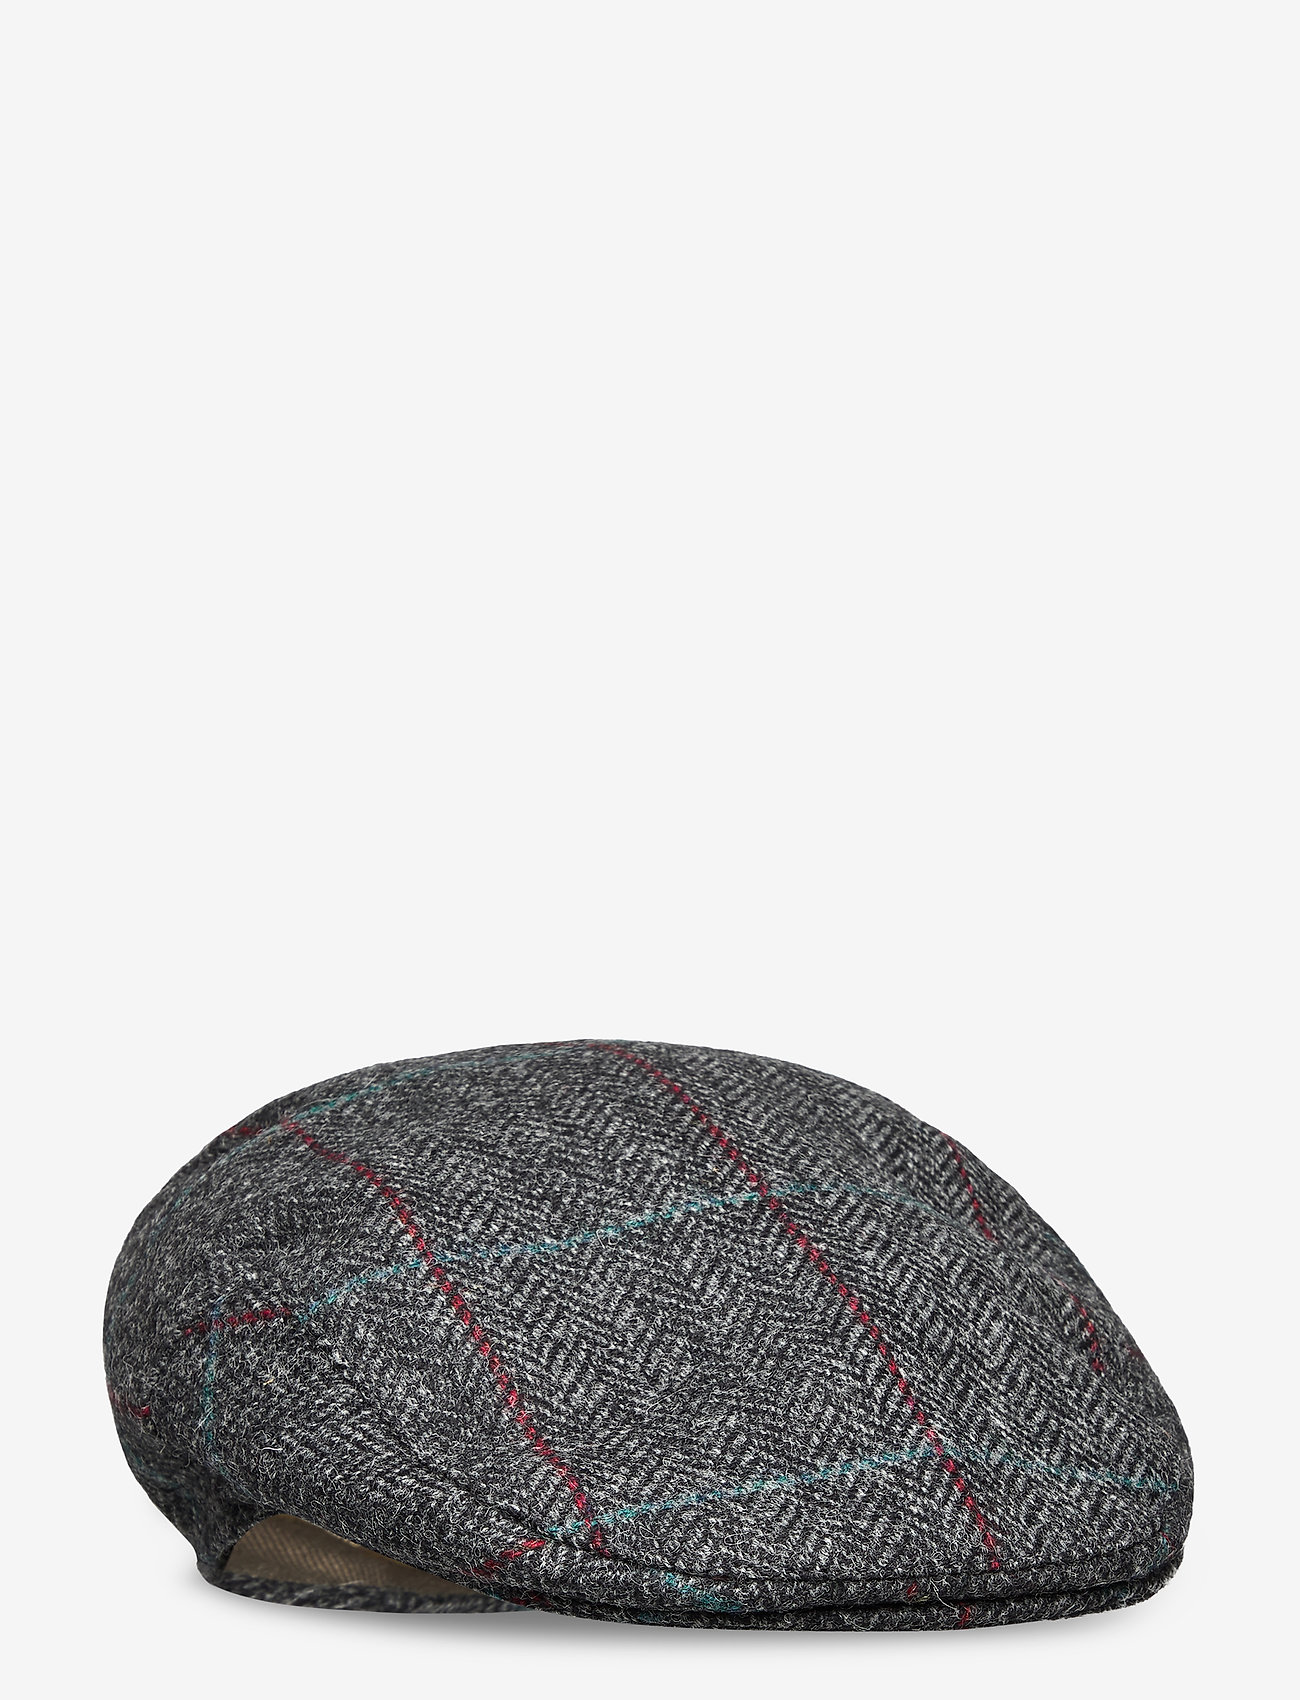 Barbour - Barbour Crief Flat Cap - flat caps - charcoal/red/bl - 0